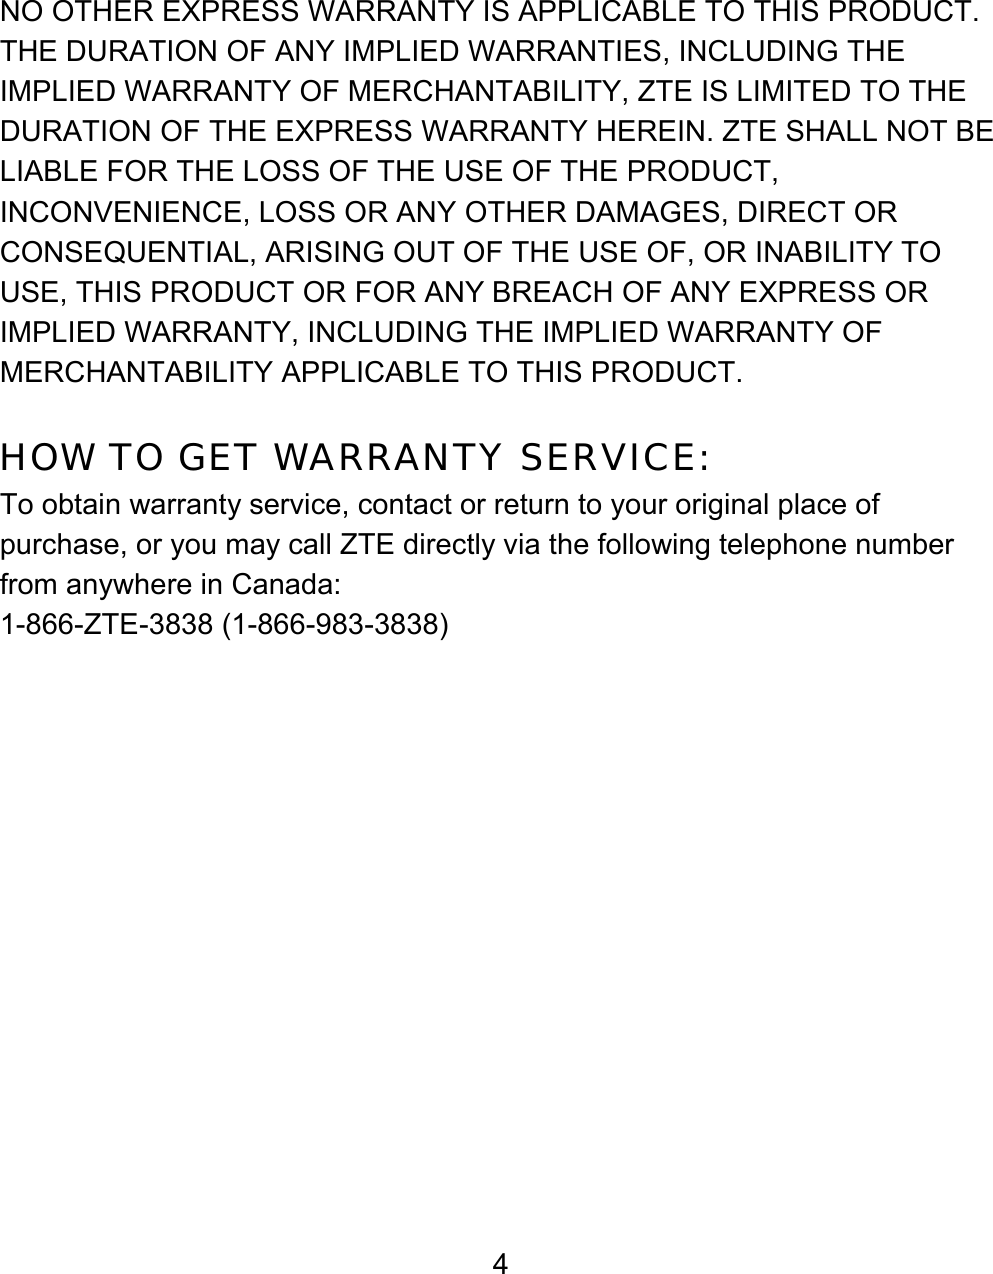 4 NO OTHER EXPRESS WARRANTY IS APPLICABLE TO THIS PRODUCT. THE DURATION OF ANY IMPLIED WARRANTIES, INCLUDING THE IMPLIED WARRANTY OF MERCHANTABILITY, ZTE IS LIMITED TO THE DURATION OF THE EXPRESS WARRANTY HEREIN. ZTE SHALL NOT BE LIABLE FOR THE LOSS OF THE USE OF THE PRODUCT, INCONVENIENCE, LOSS OR ANY OTHER DAMAGES, DIRECT OR CONSEQUENTIAL, ARISING OUT OF THE USE OF, OR INABILITY TO USE, THIS PRODUCT OR FOR ANY BREACH OF ANY EXPRESS OR IMPLIED WARRANTY, INCLUDING THE IMPLIED WARRANTY OF MERCHANTABILITY APPLICABLE TO THIS PRODUCT.  HOW TO GET WARRANTY SERVICE: To obtain warranty service, contact or return to your original place of purchase, or you may call ZTE directly via the following telephone number from anywhere in Canada: 1-866-ZTE-3838 (1-866-983-3838) 